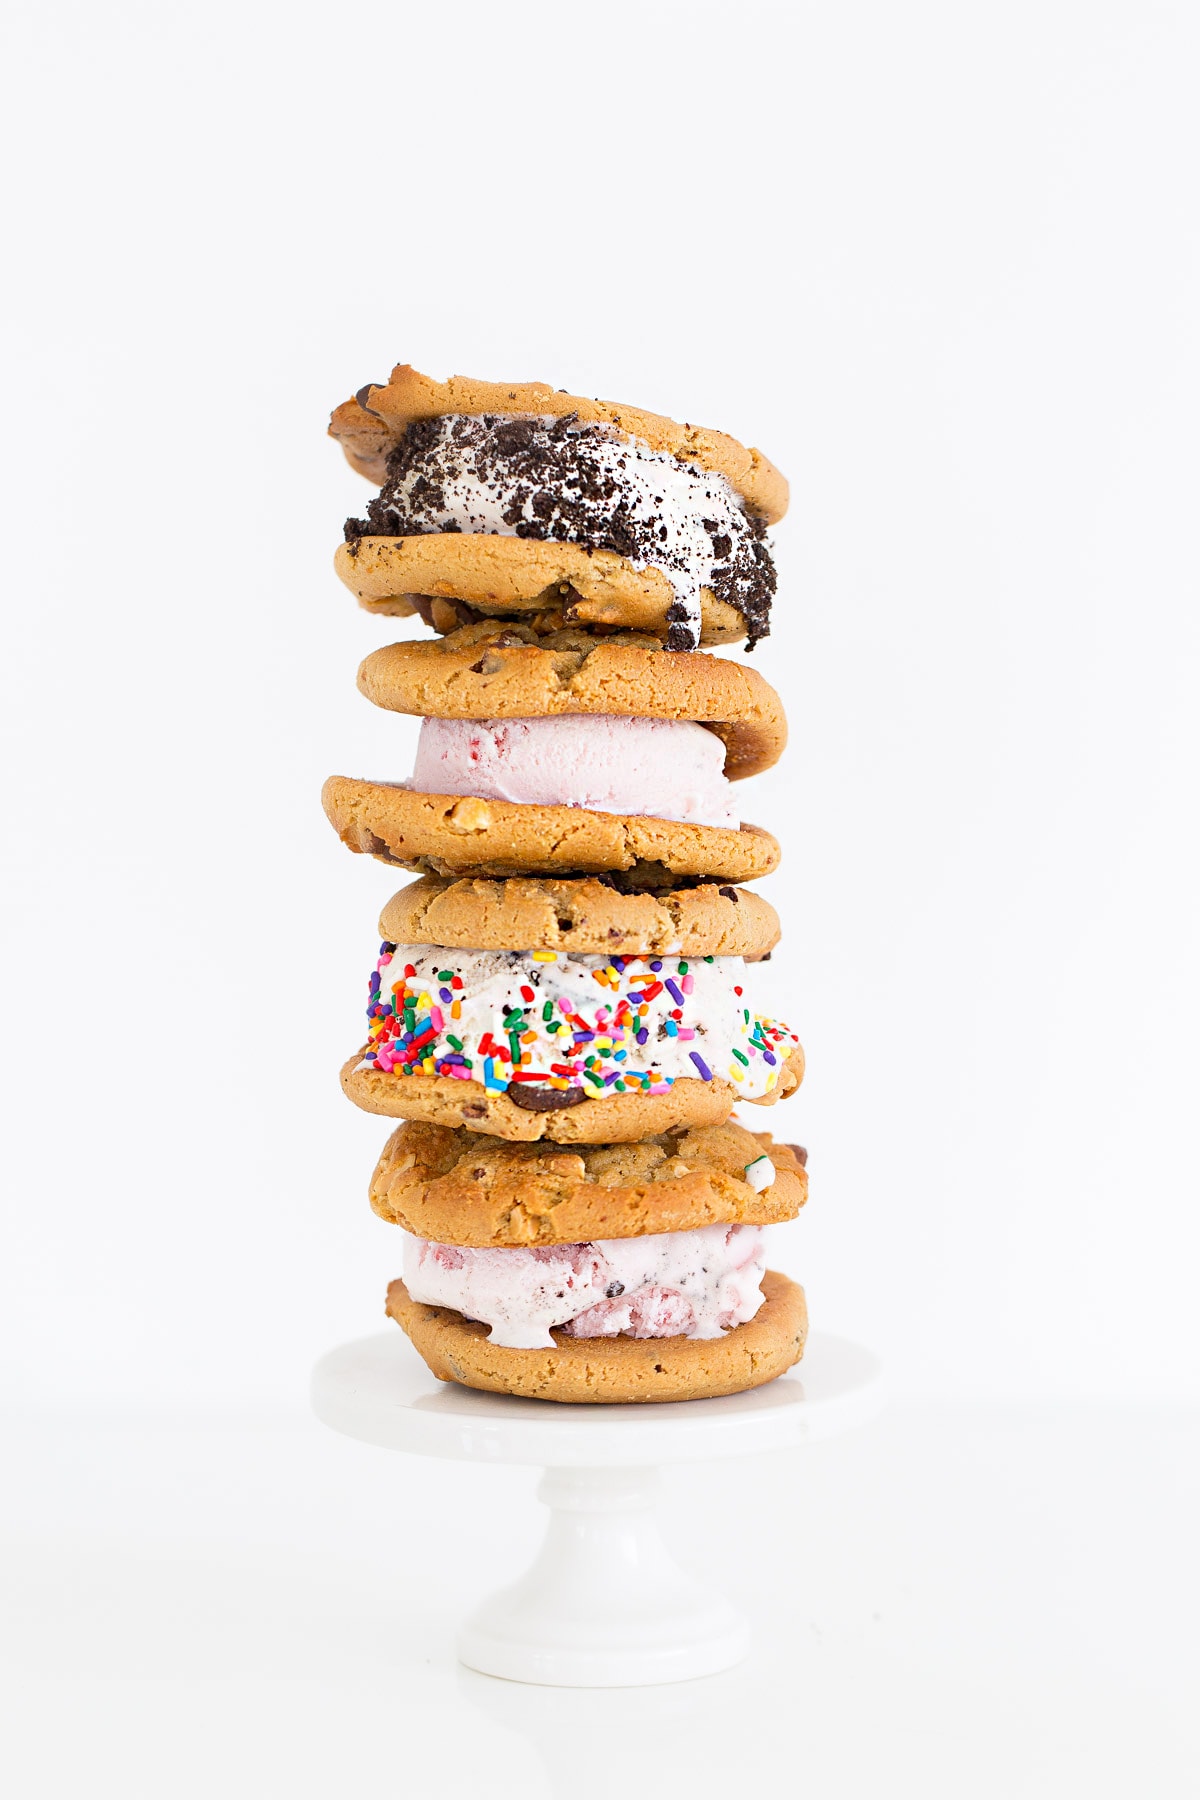 We all scream for warm cookie ice cream sandwiches, am I right?! Download these free printable ice cream postcard invitations by Sugar & Cloth for Baskin-Robbins